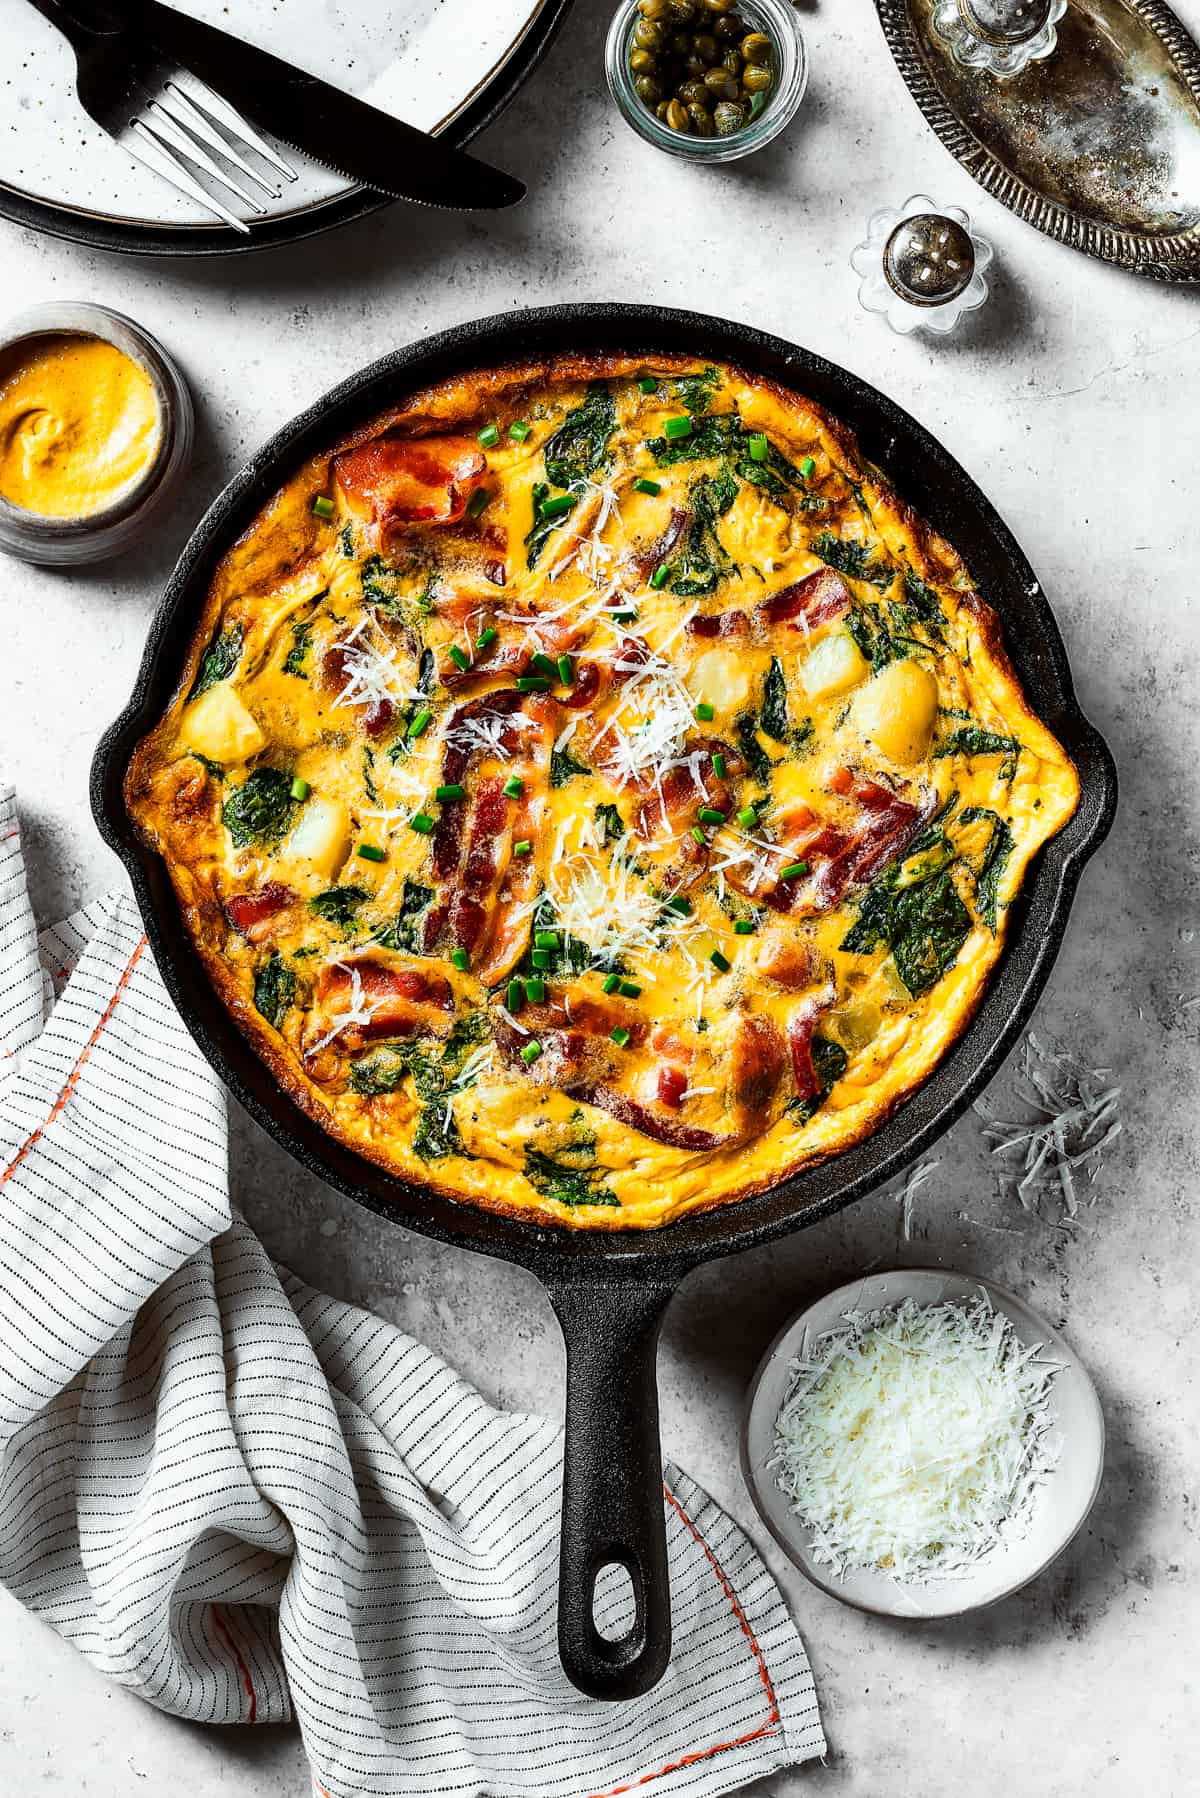 A fully-cooked frittata in a cast-iron skillet.